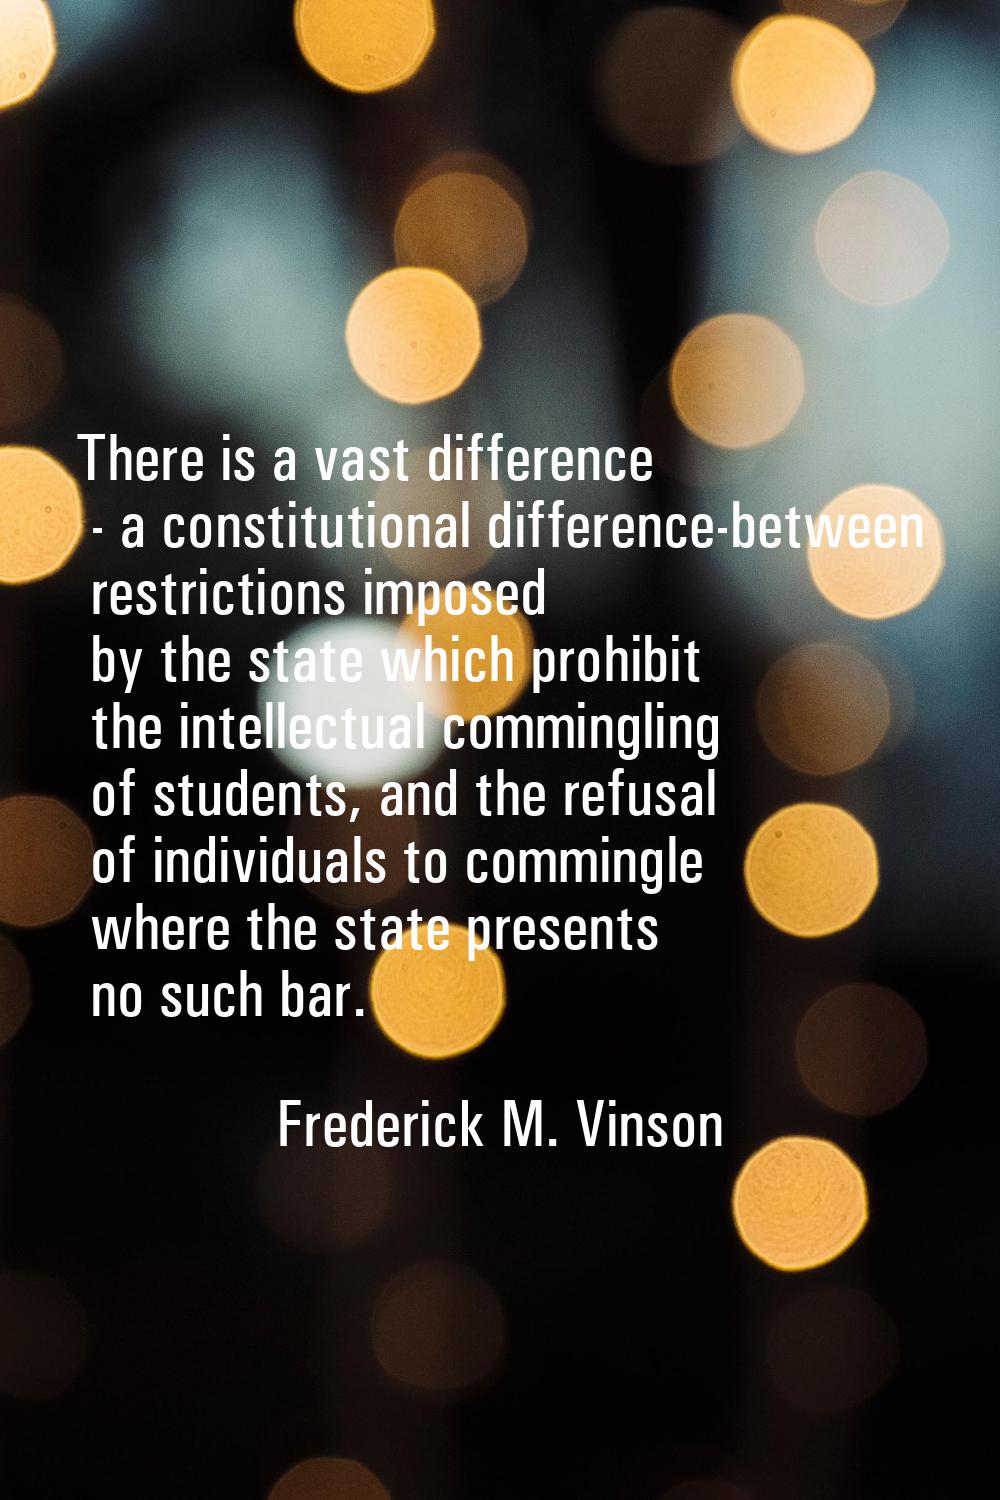 There is a vast difference - a constitutional difference-between restrictions imposed by the state 